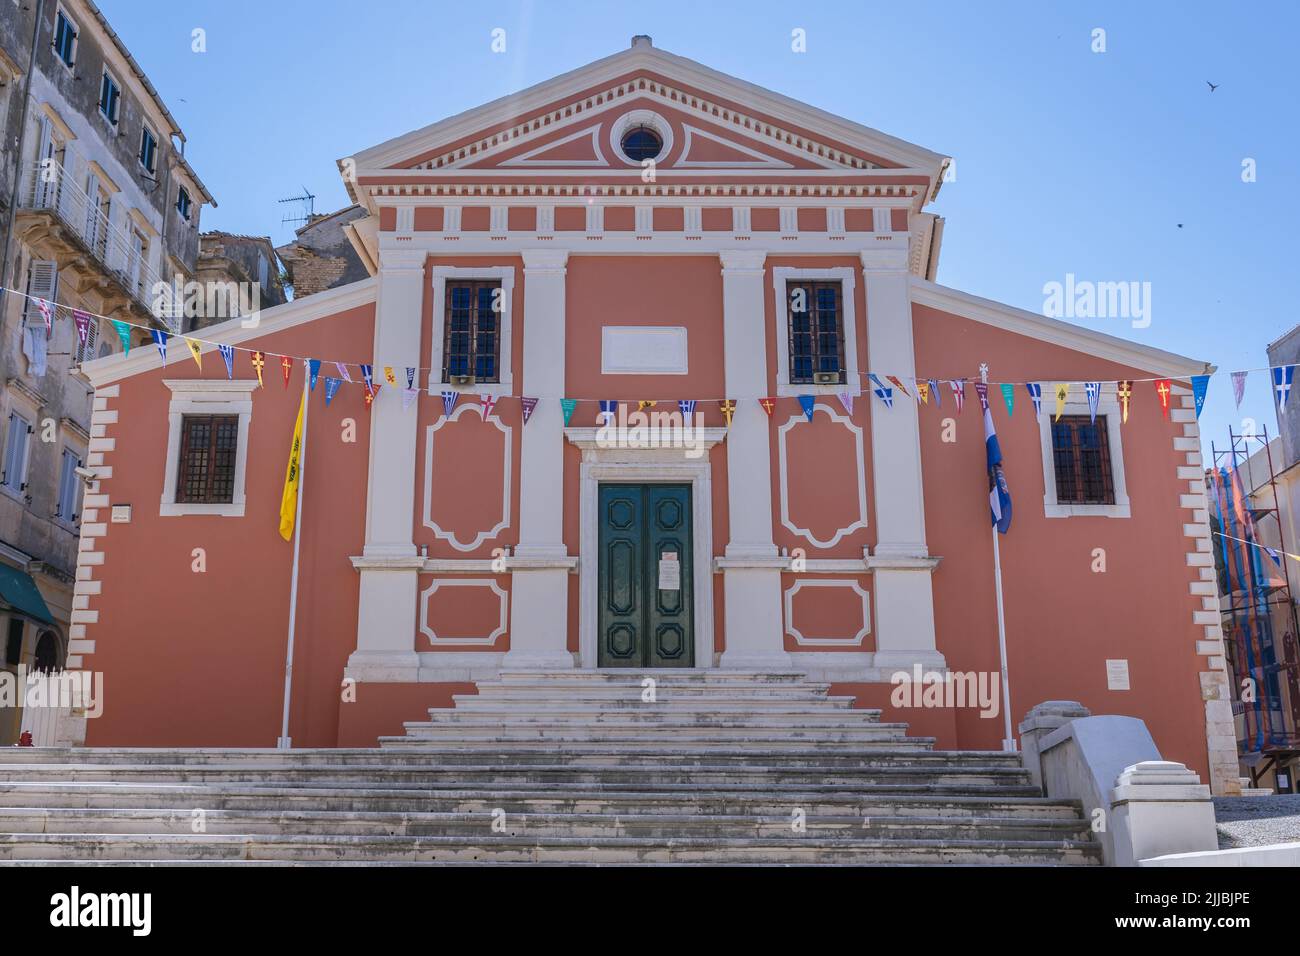 Holy Church of the Holy Fathers and Saint Arsenios on Old Town of Corfu city on the island of Corfu, Ionian Islands, Greece Stock Photo